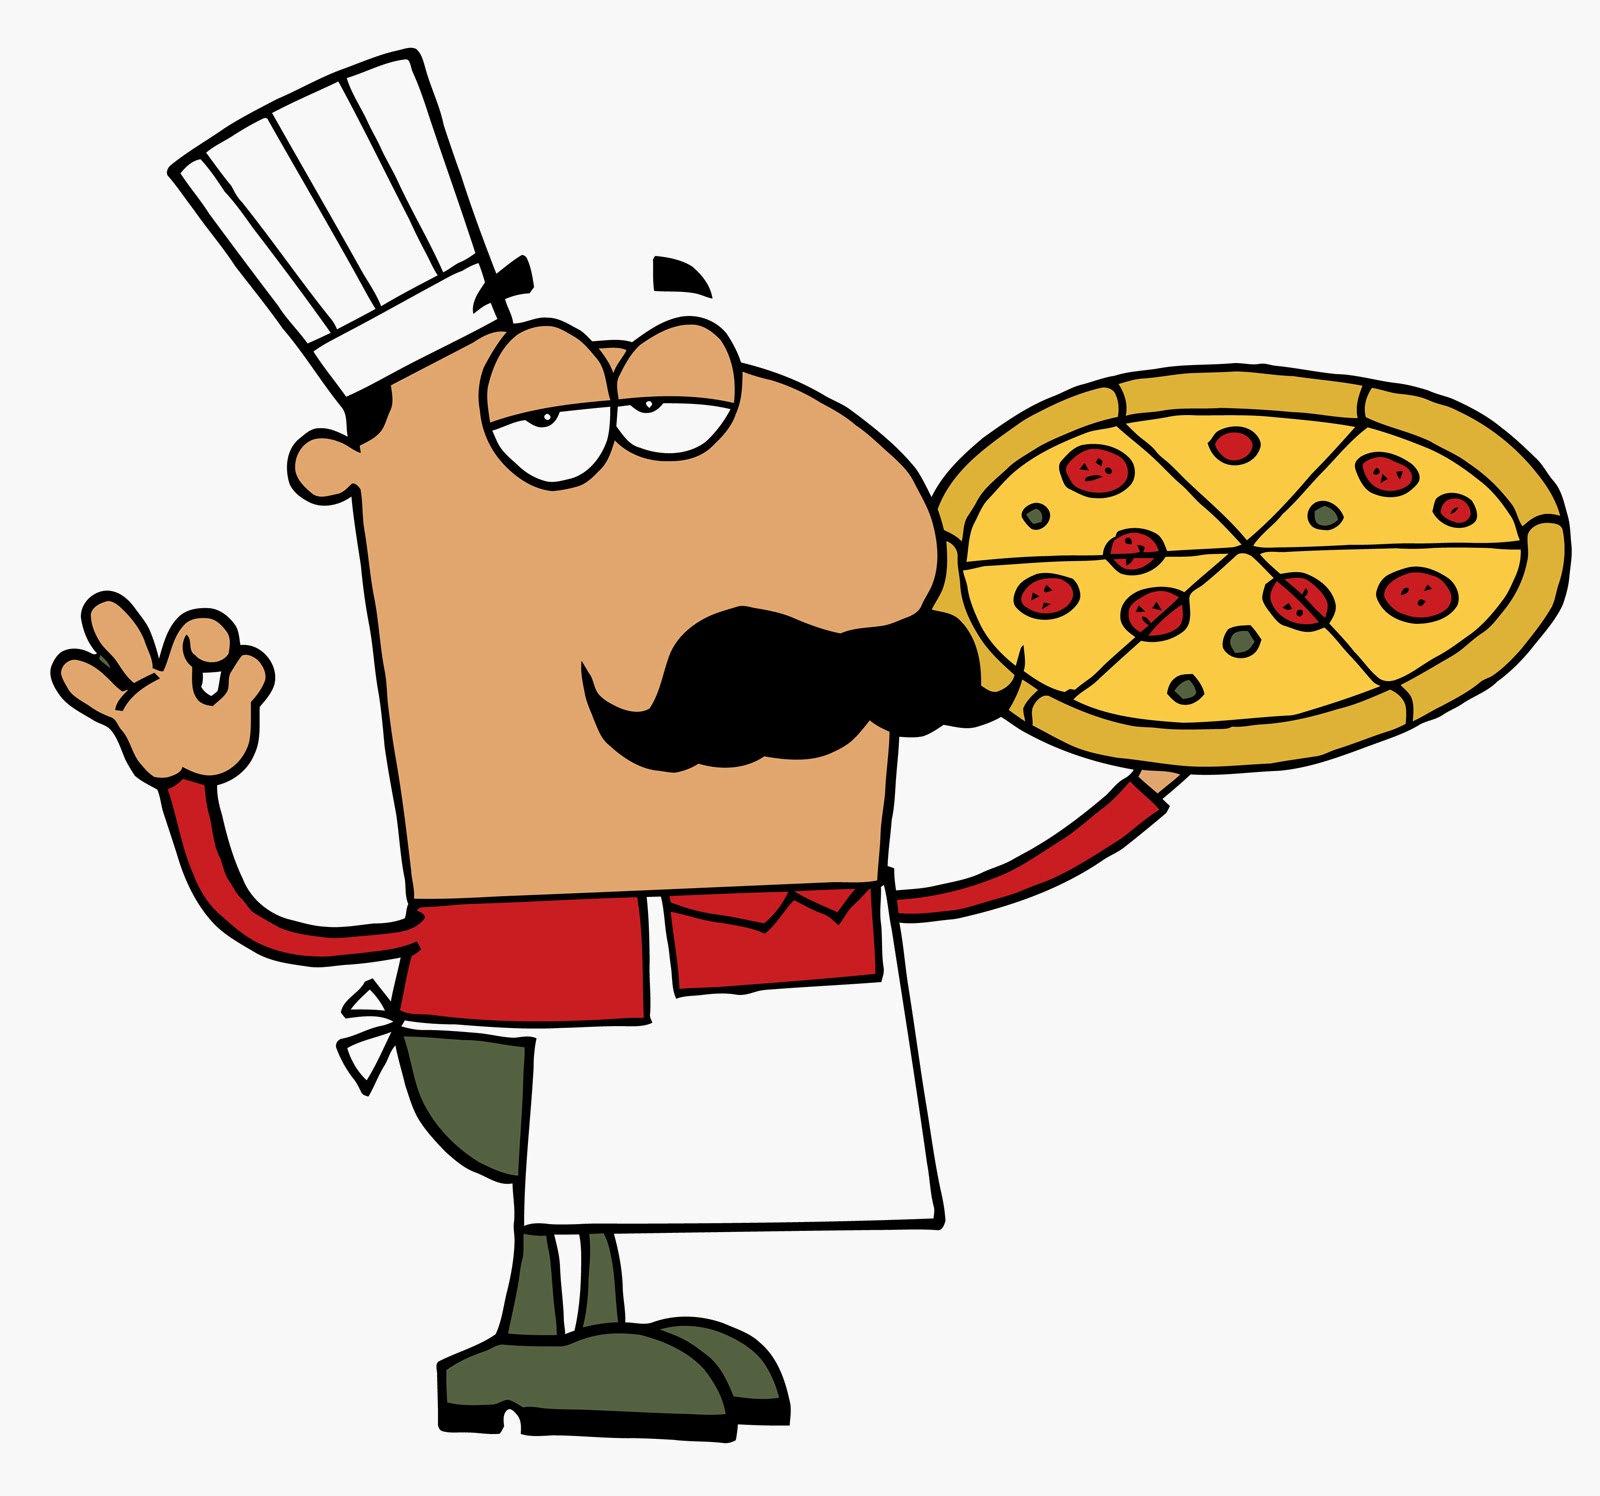 Pizza clipart free